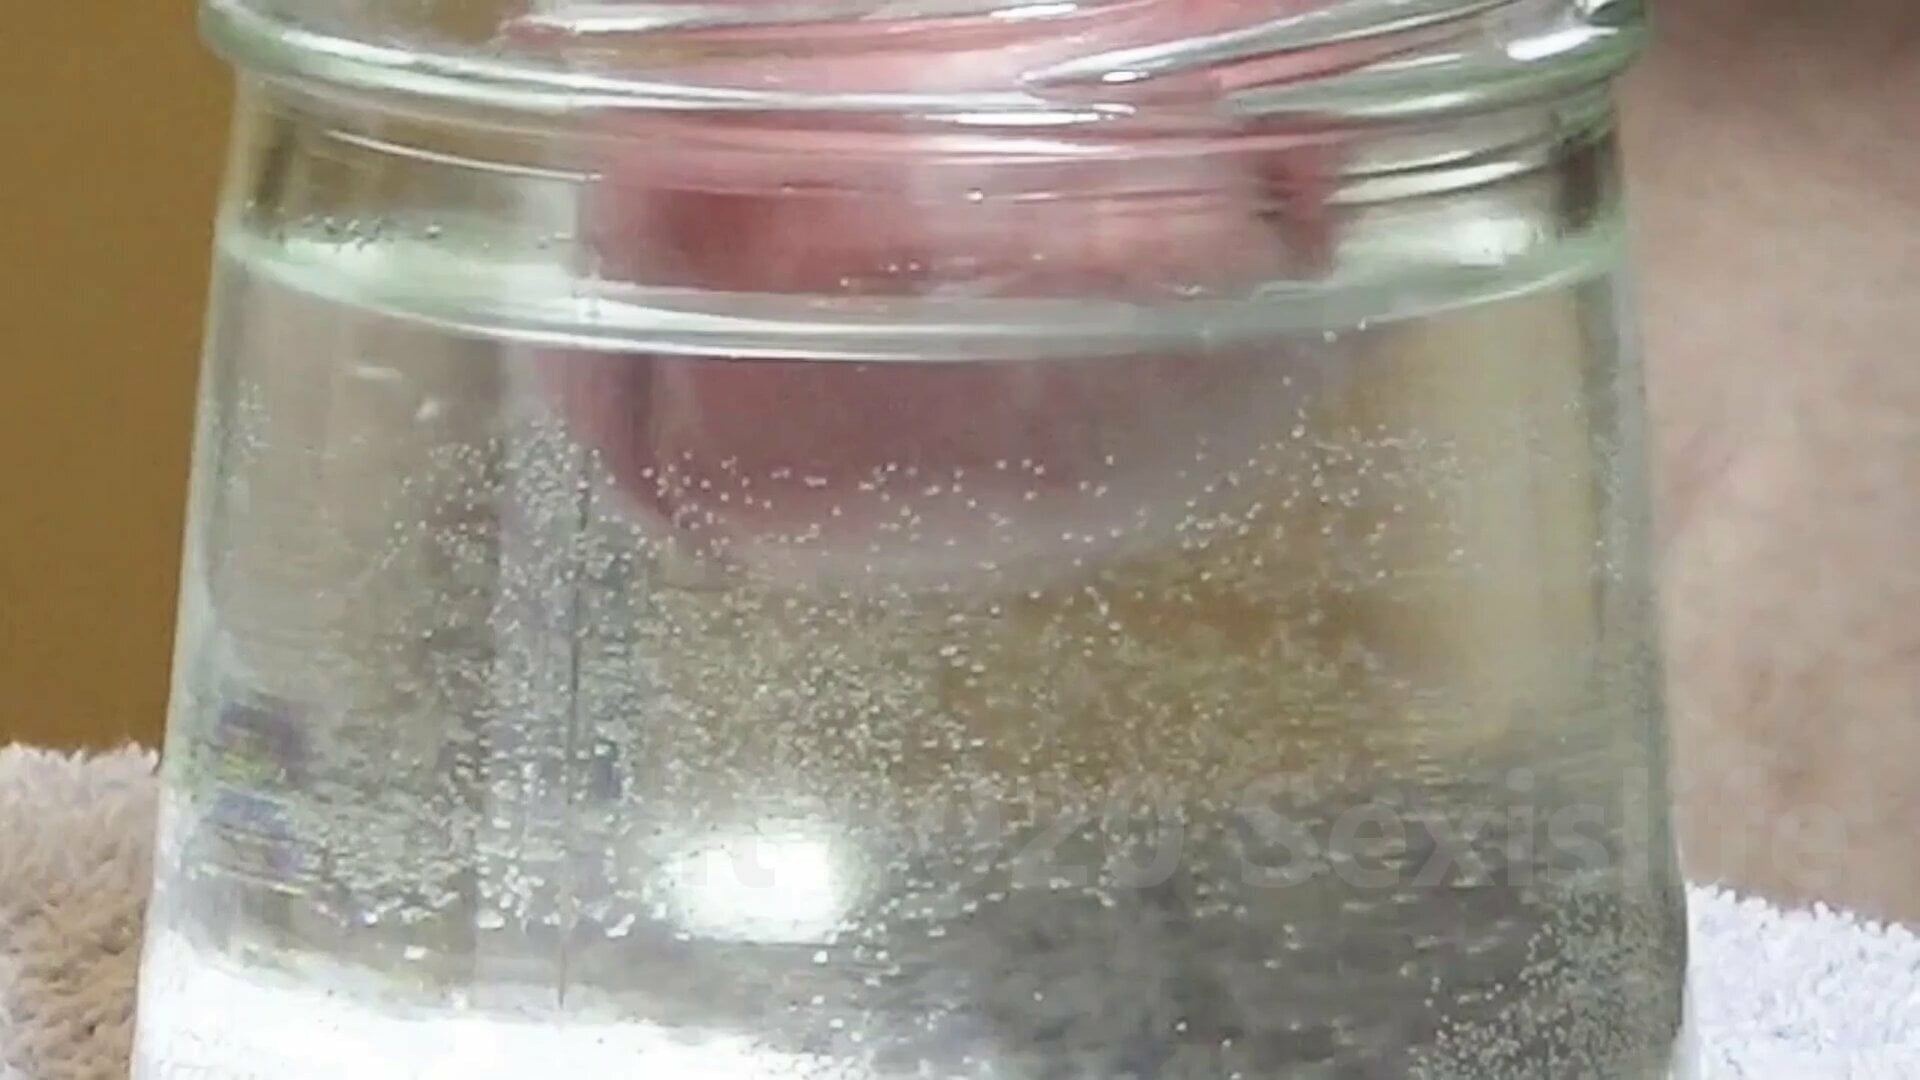 3 Submarine Cumshots in glass of water + slow motion - 9